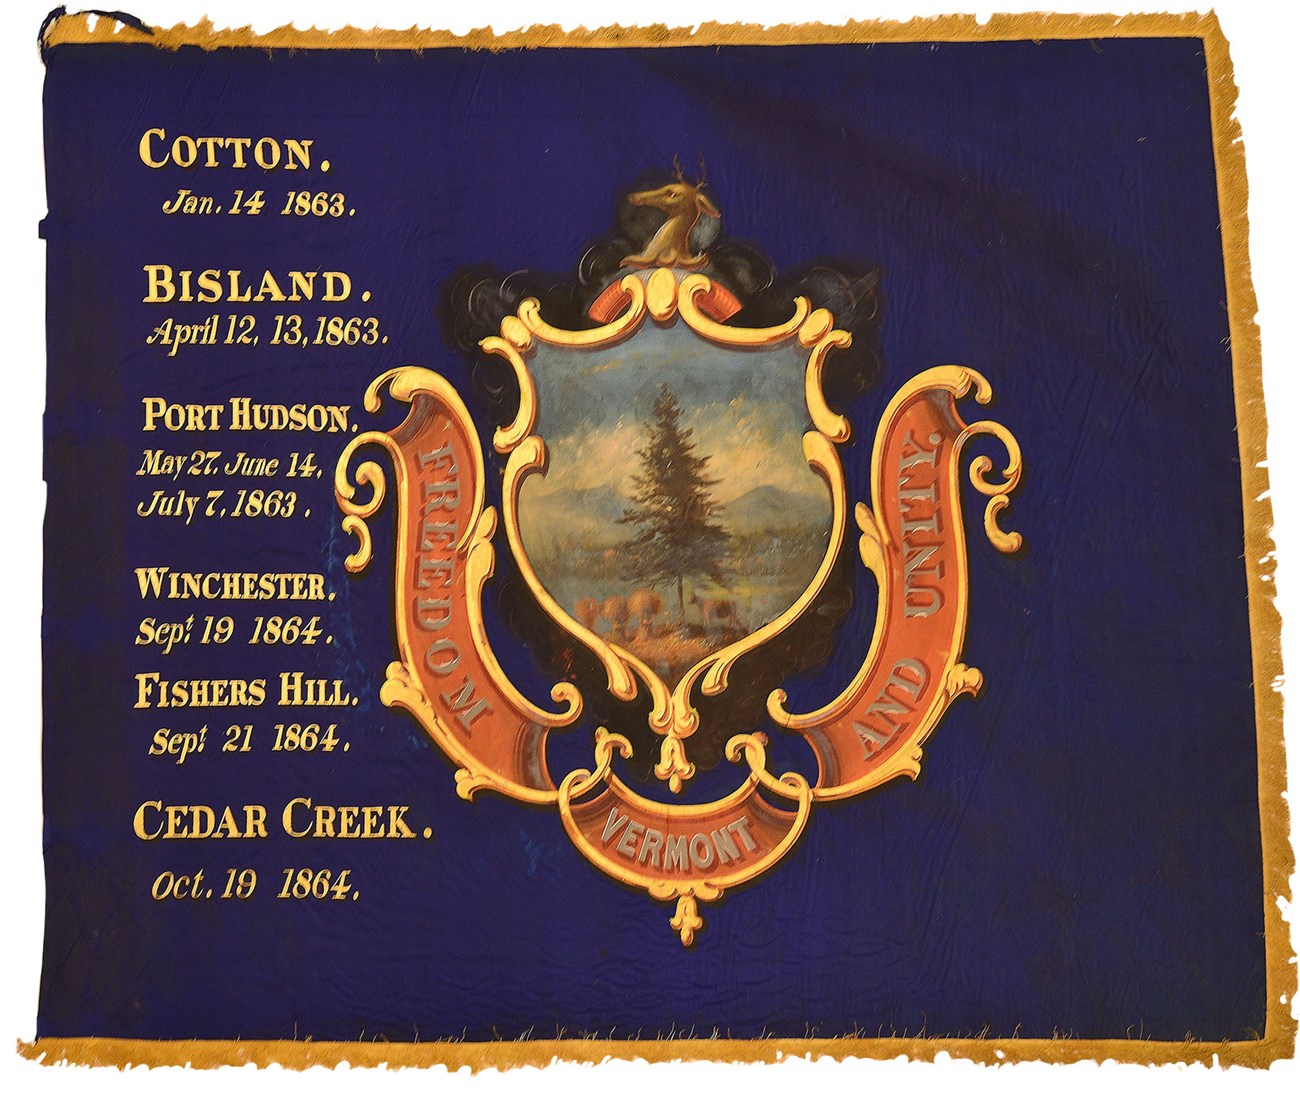 A blue flag with gold fringe has a state crest with a list of battles.